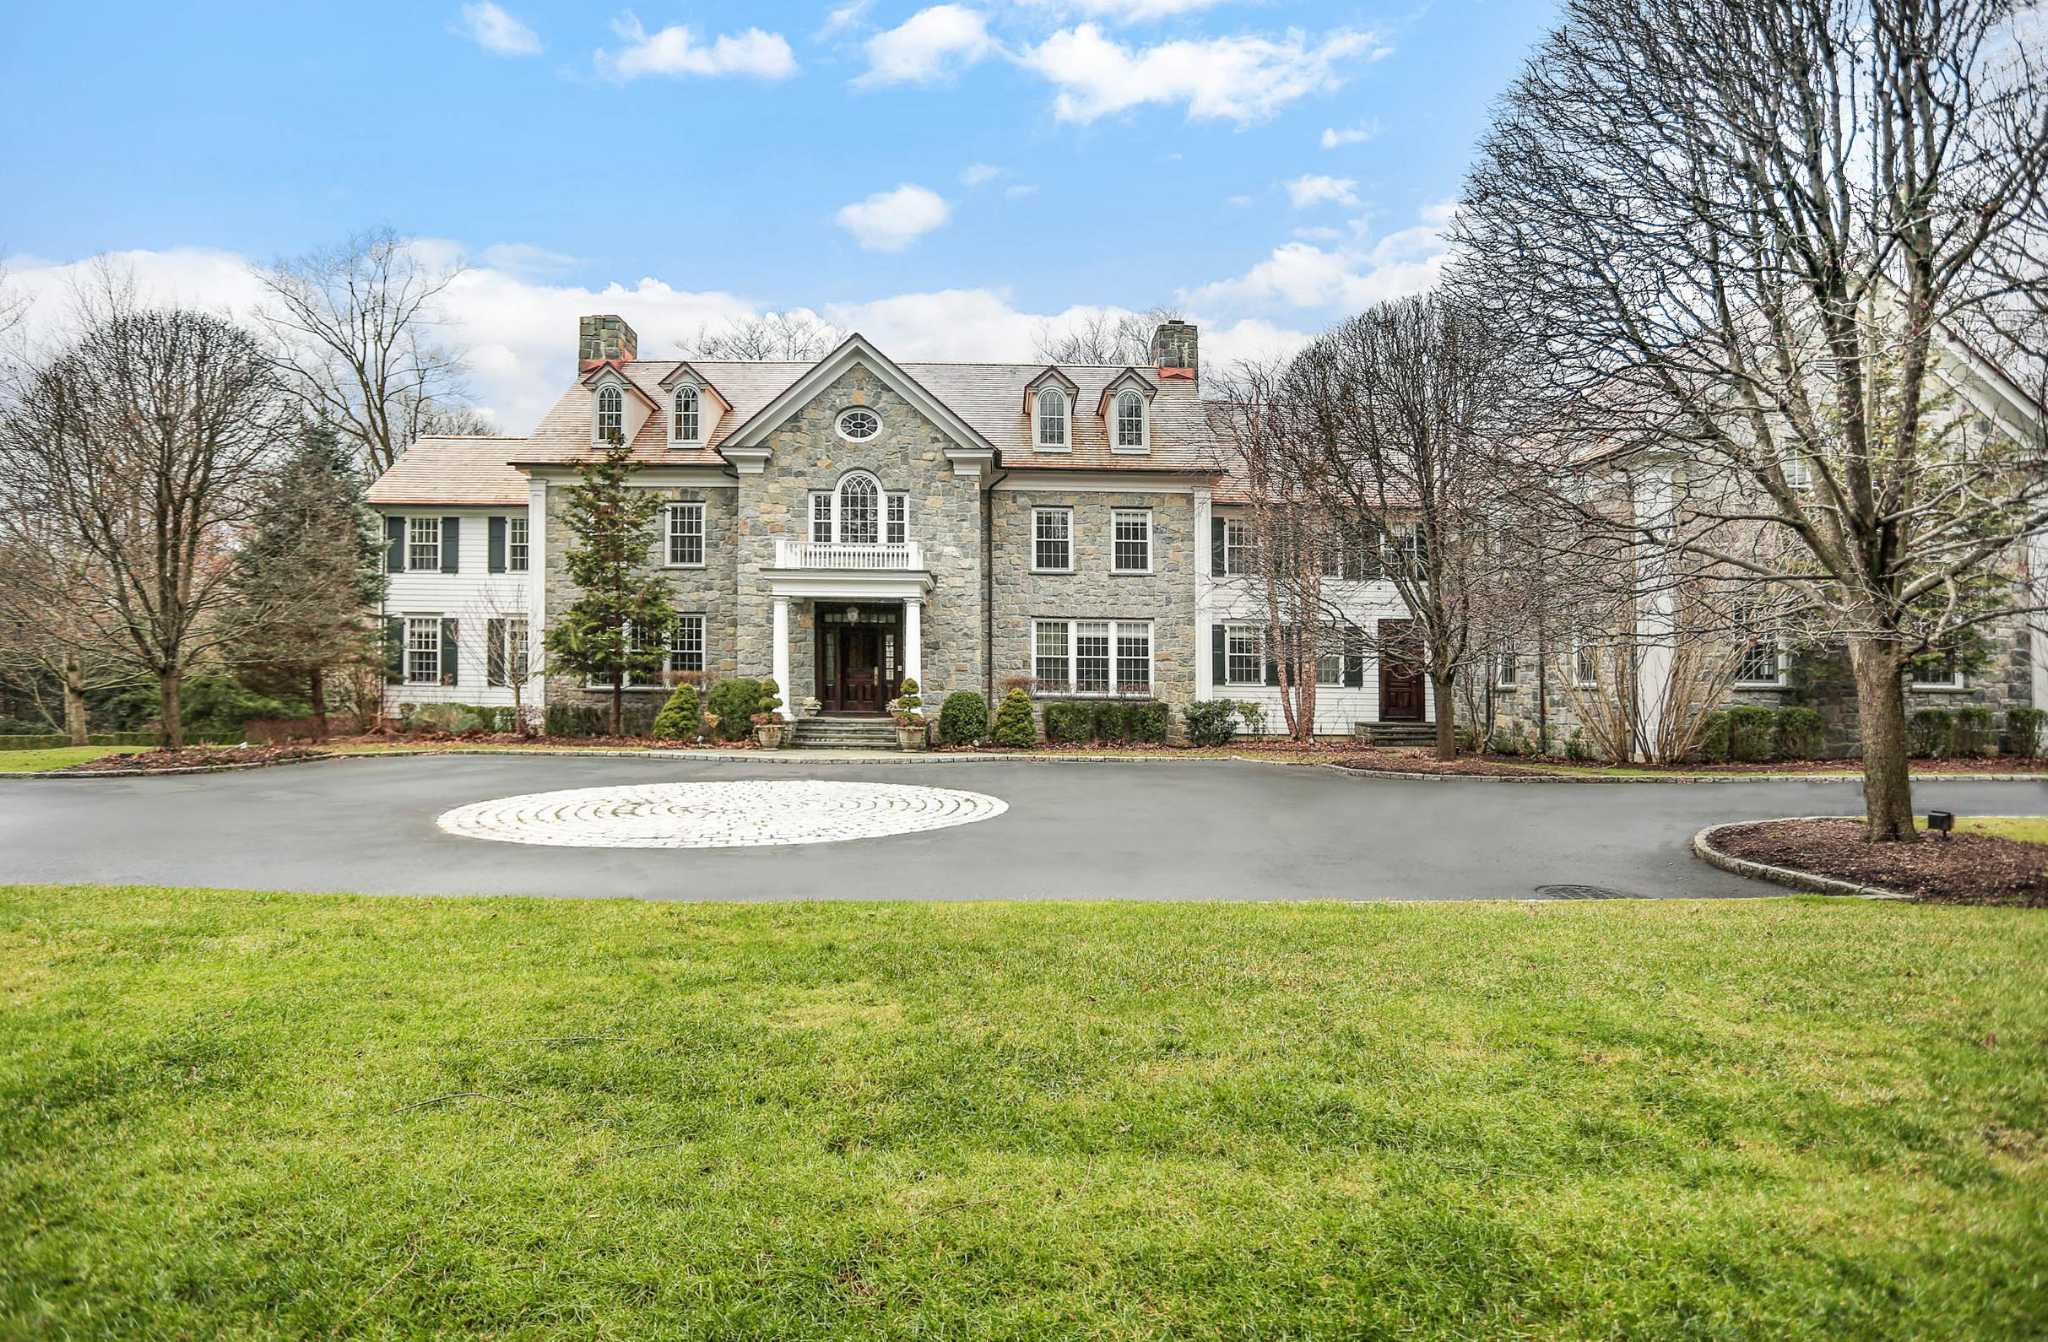 The Georgian stone manor at 69 Porchuck Road is part of 4.18-acre estate of...